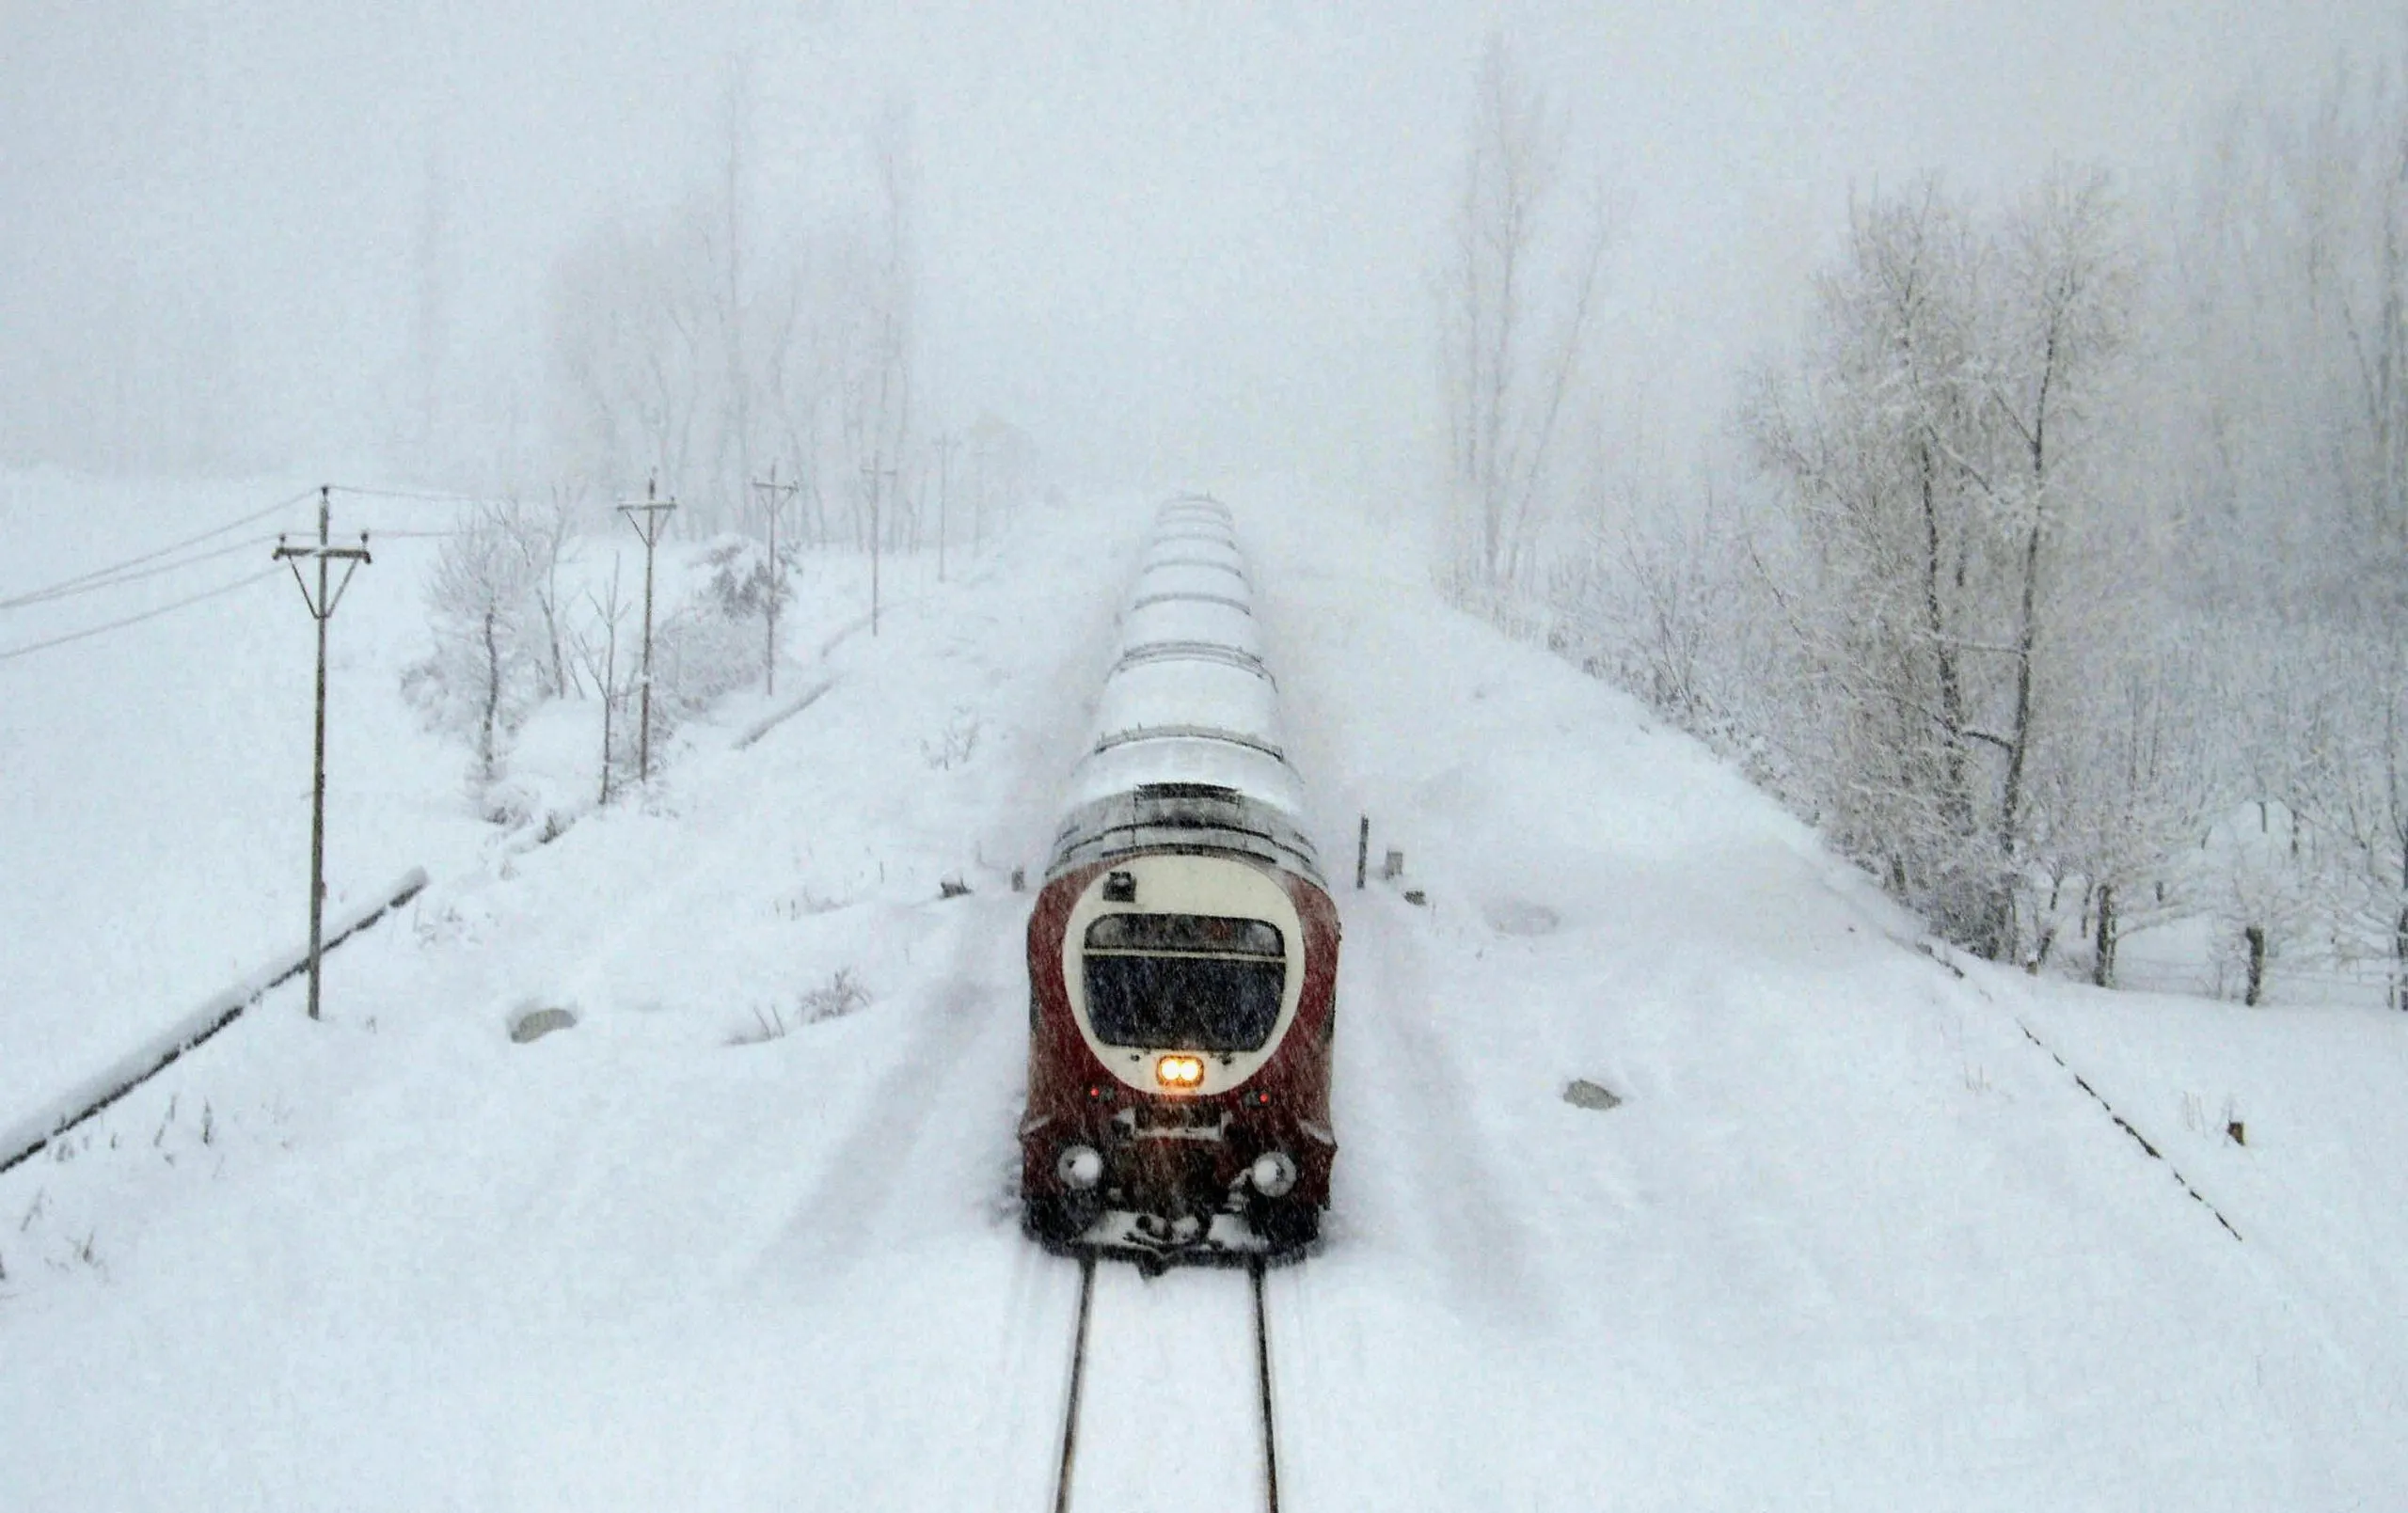 Indian Railways shared a mesmerizing video of snow covered Jammu and Kashmir